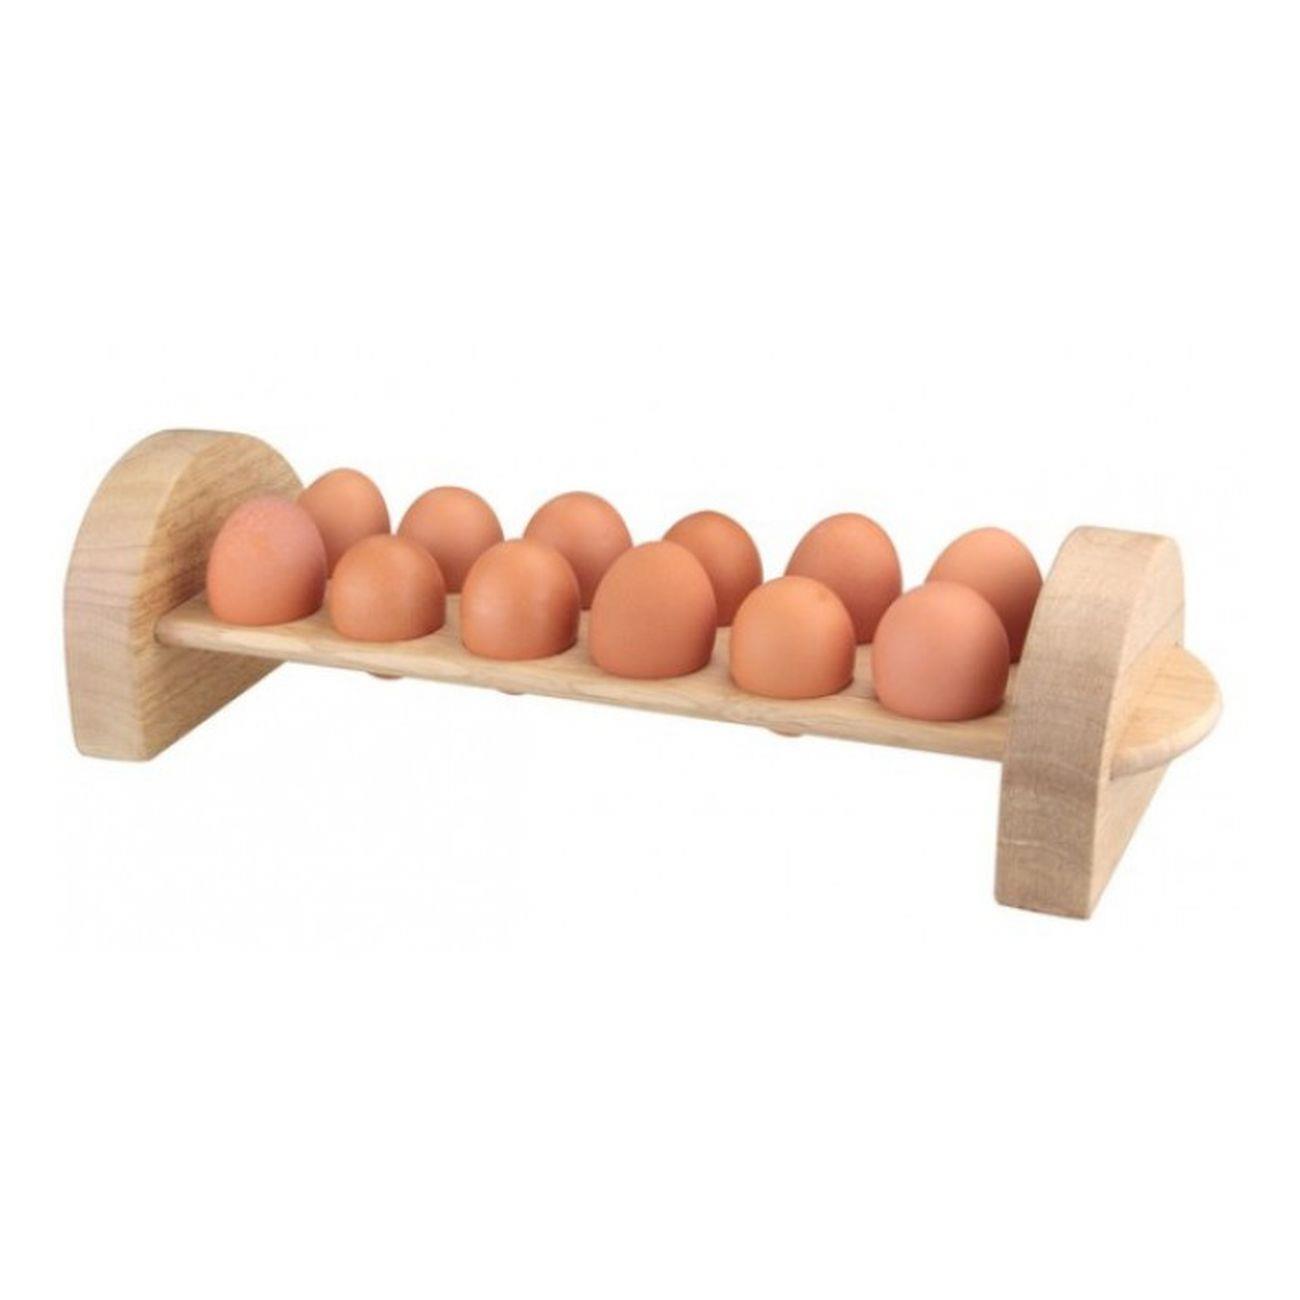 Wooden Rack 12 Eggs - Faded Box